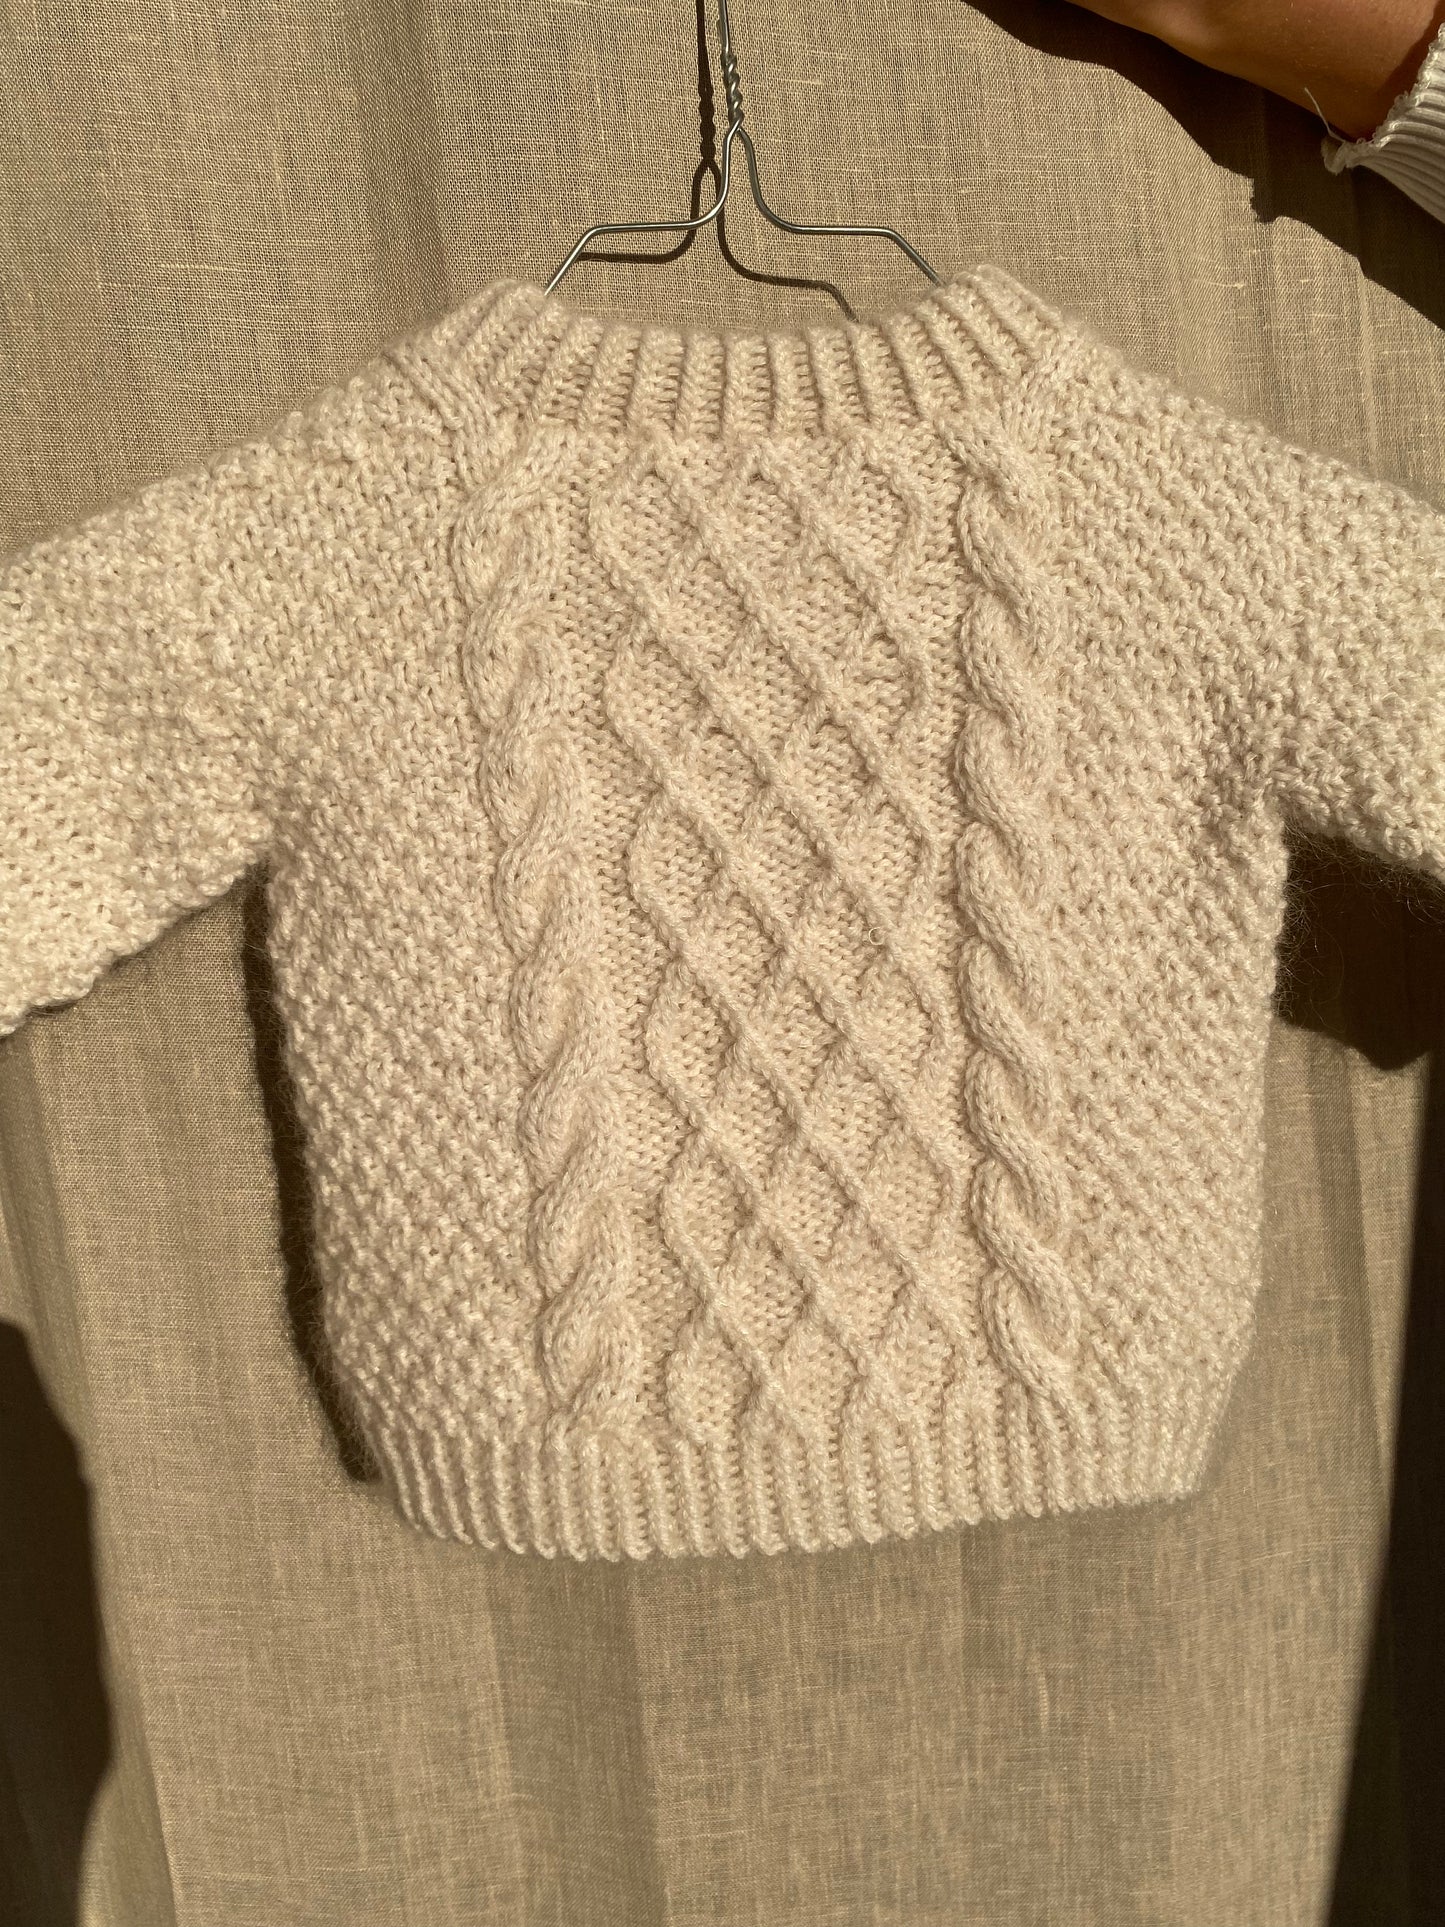 Swirl Sweater Baby - Norsk